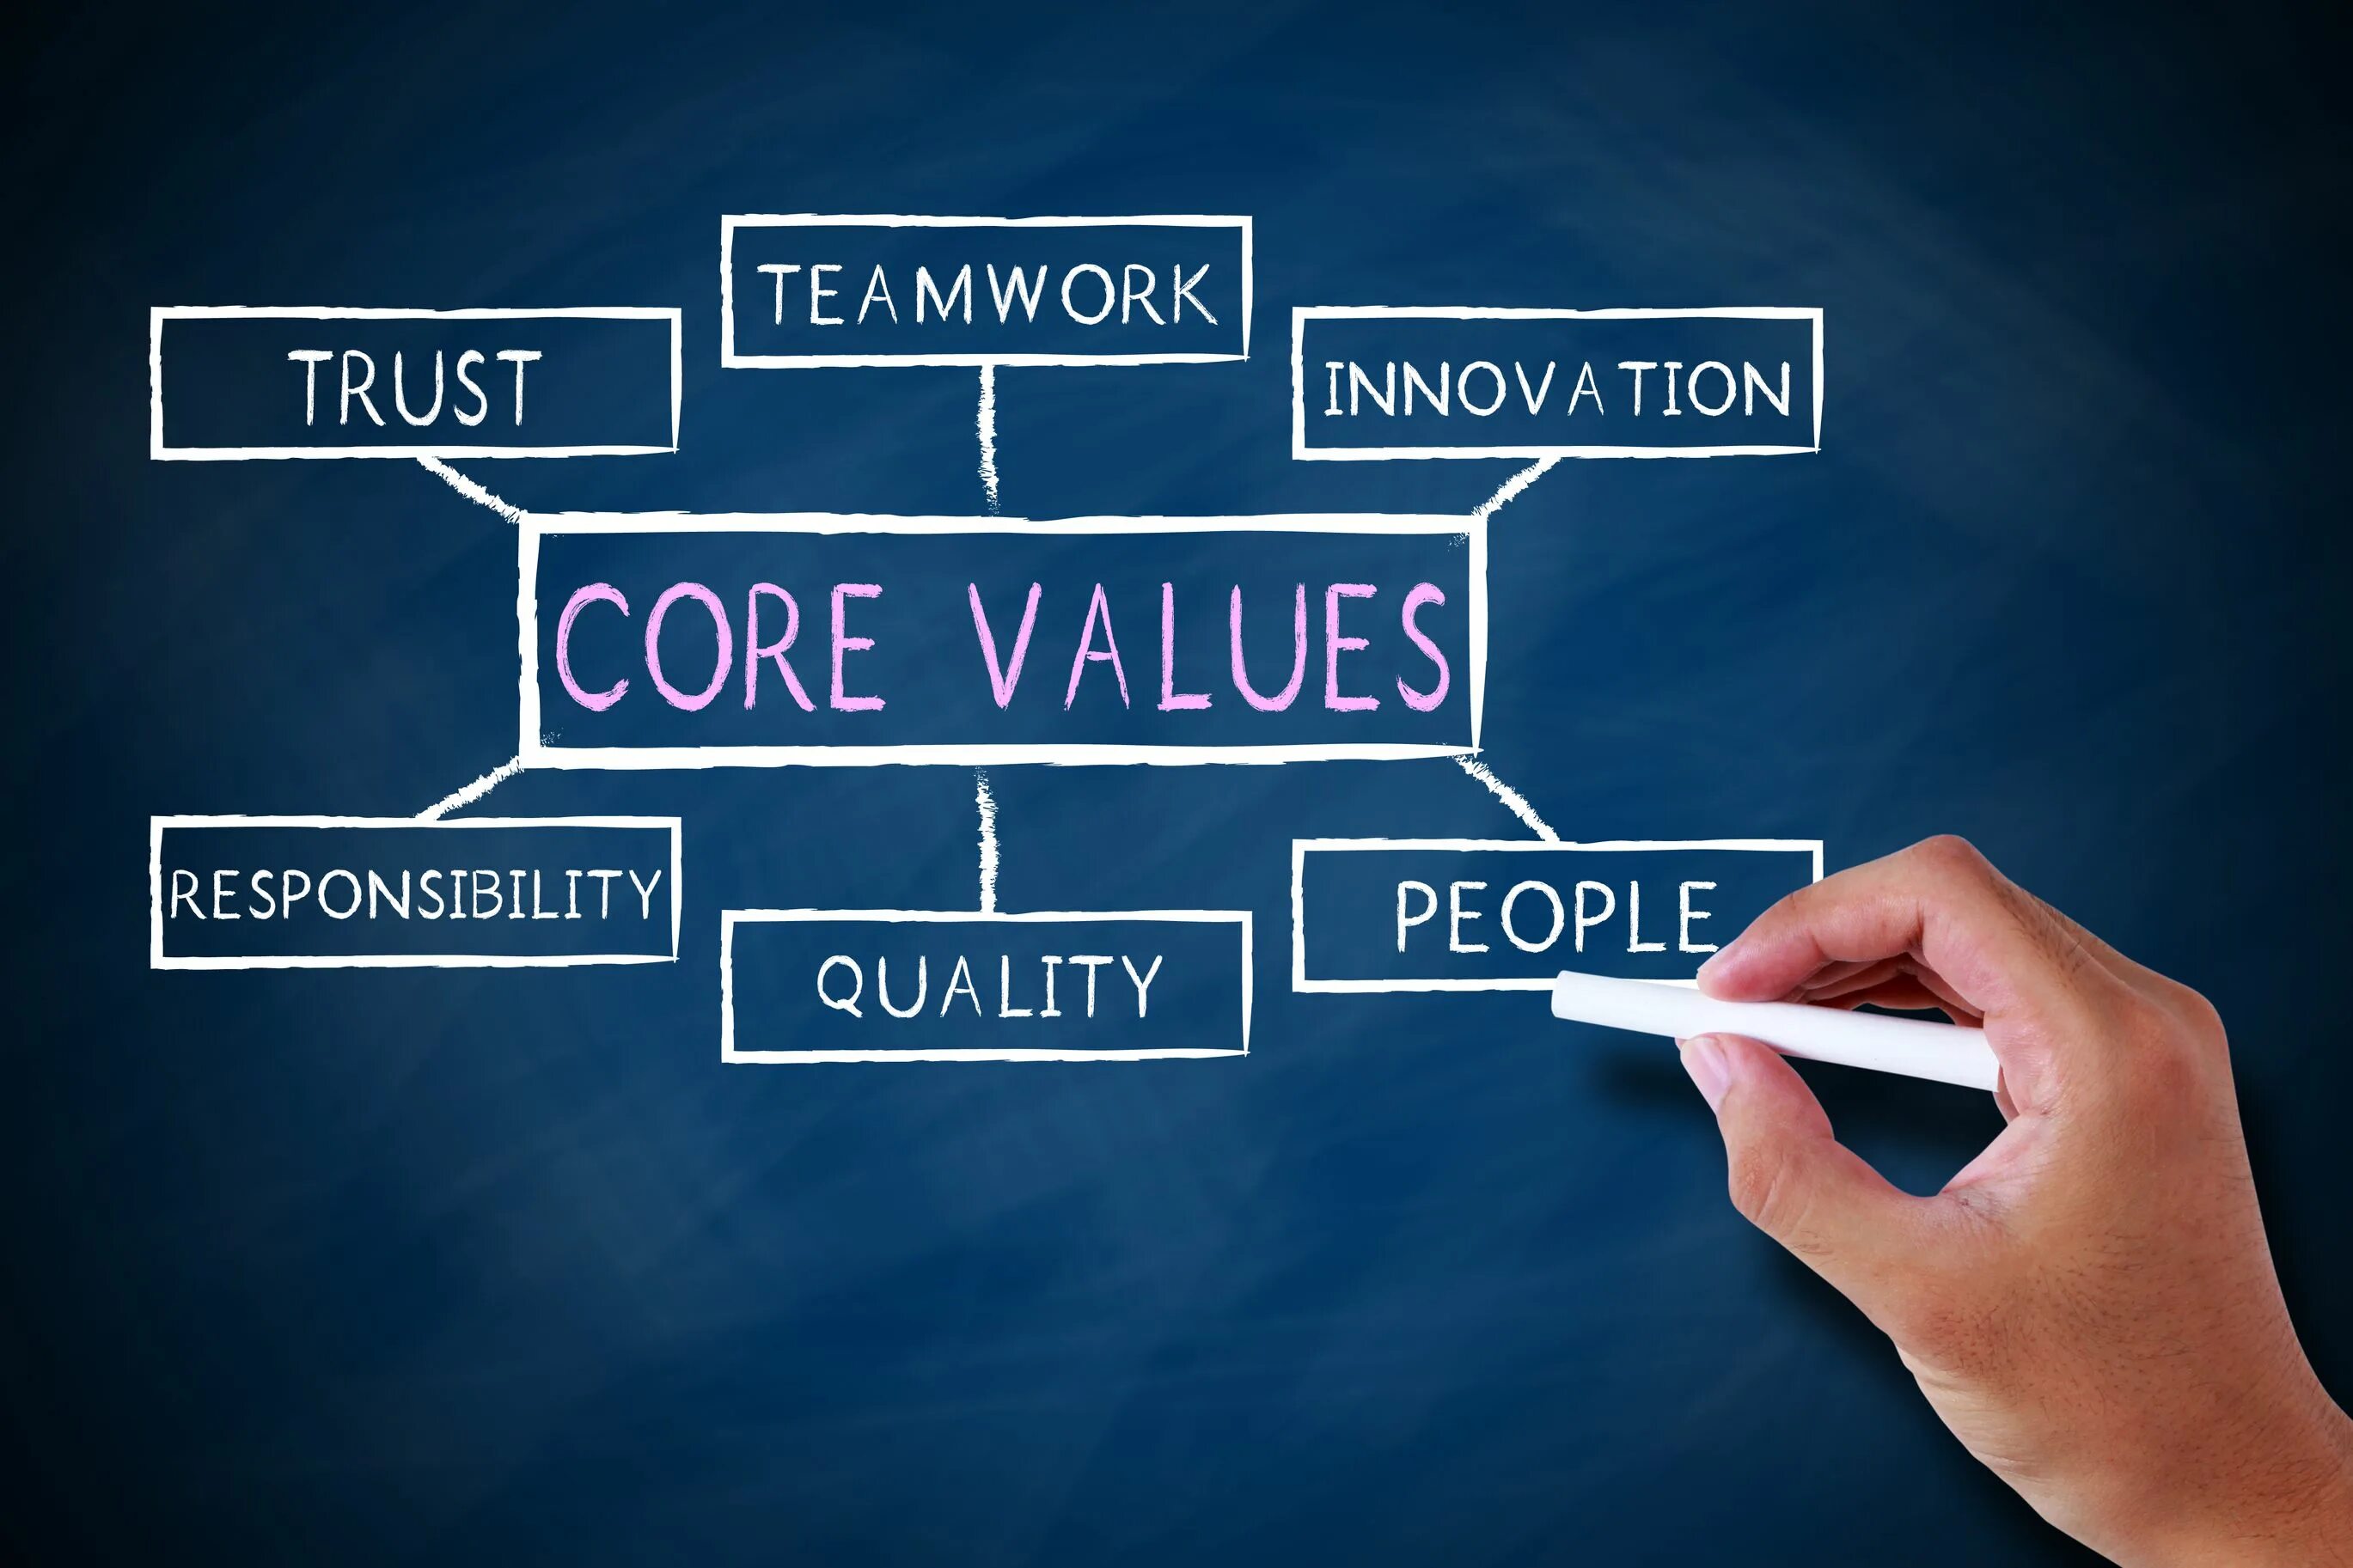 Values topic. Core values. Culture and values. Teamwork value. Work Culture.